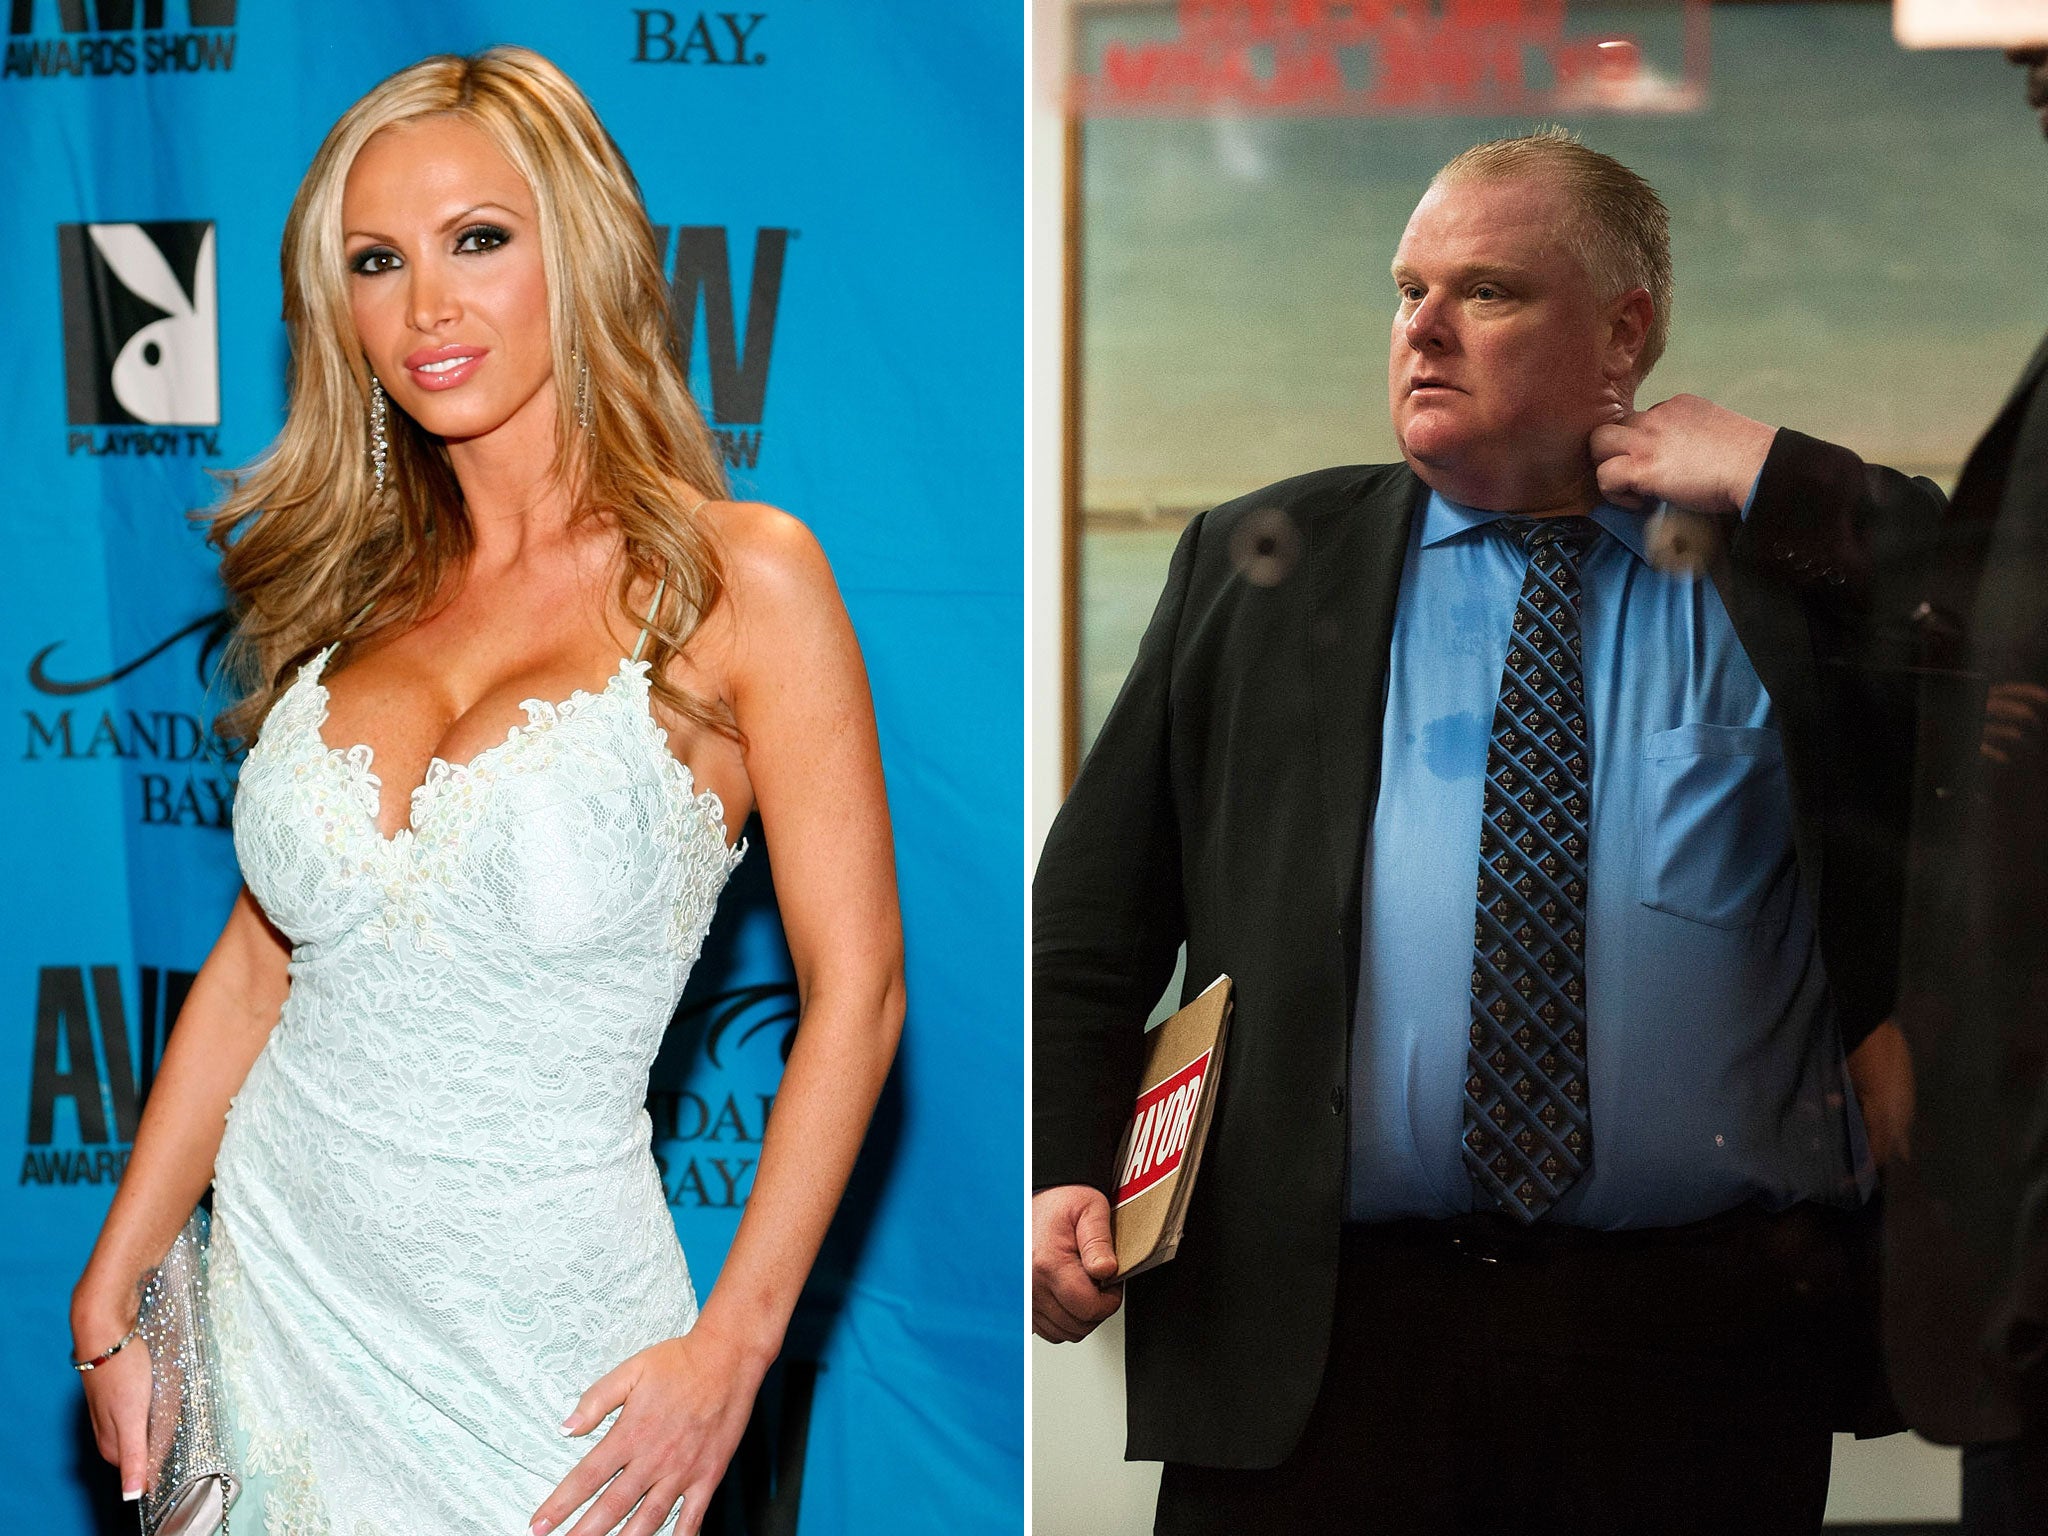 Canadian porn star Nikki Benz has formally announced her candidacy to run against scandal-ridden Toronto mayor Rob Ford in the October mayoral elections